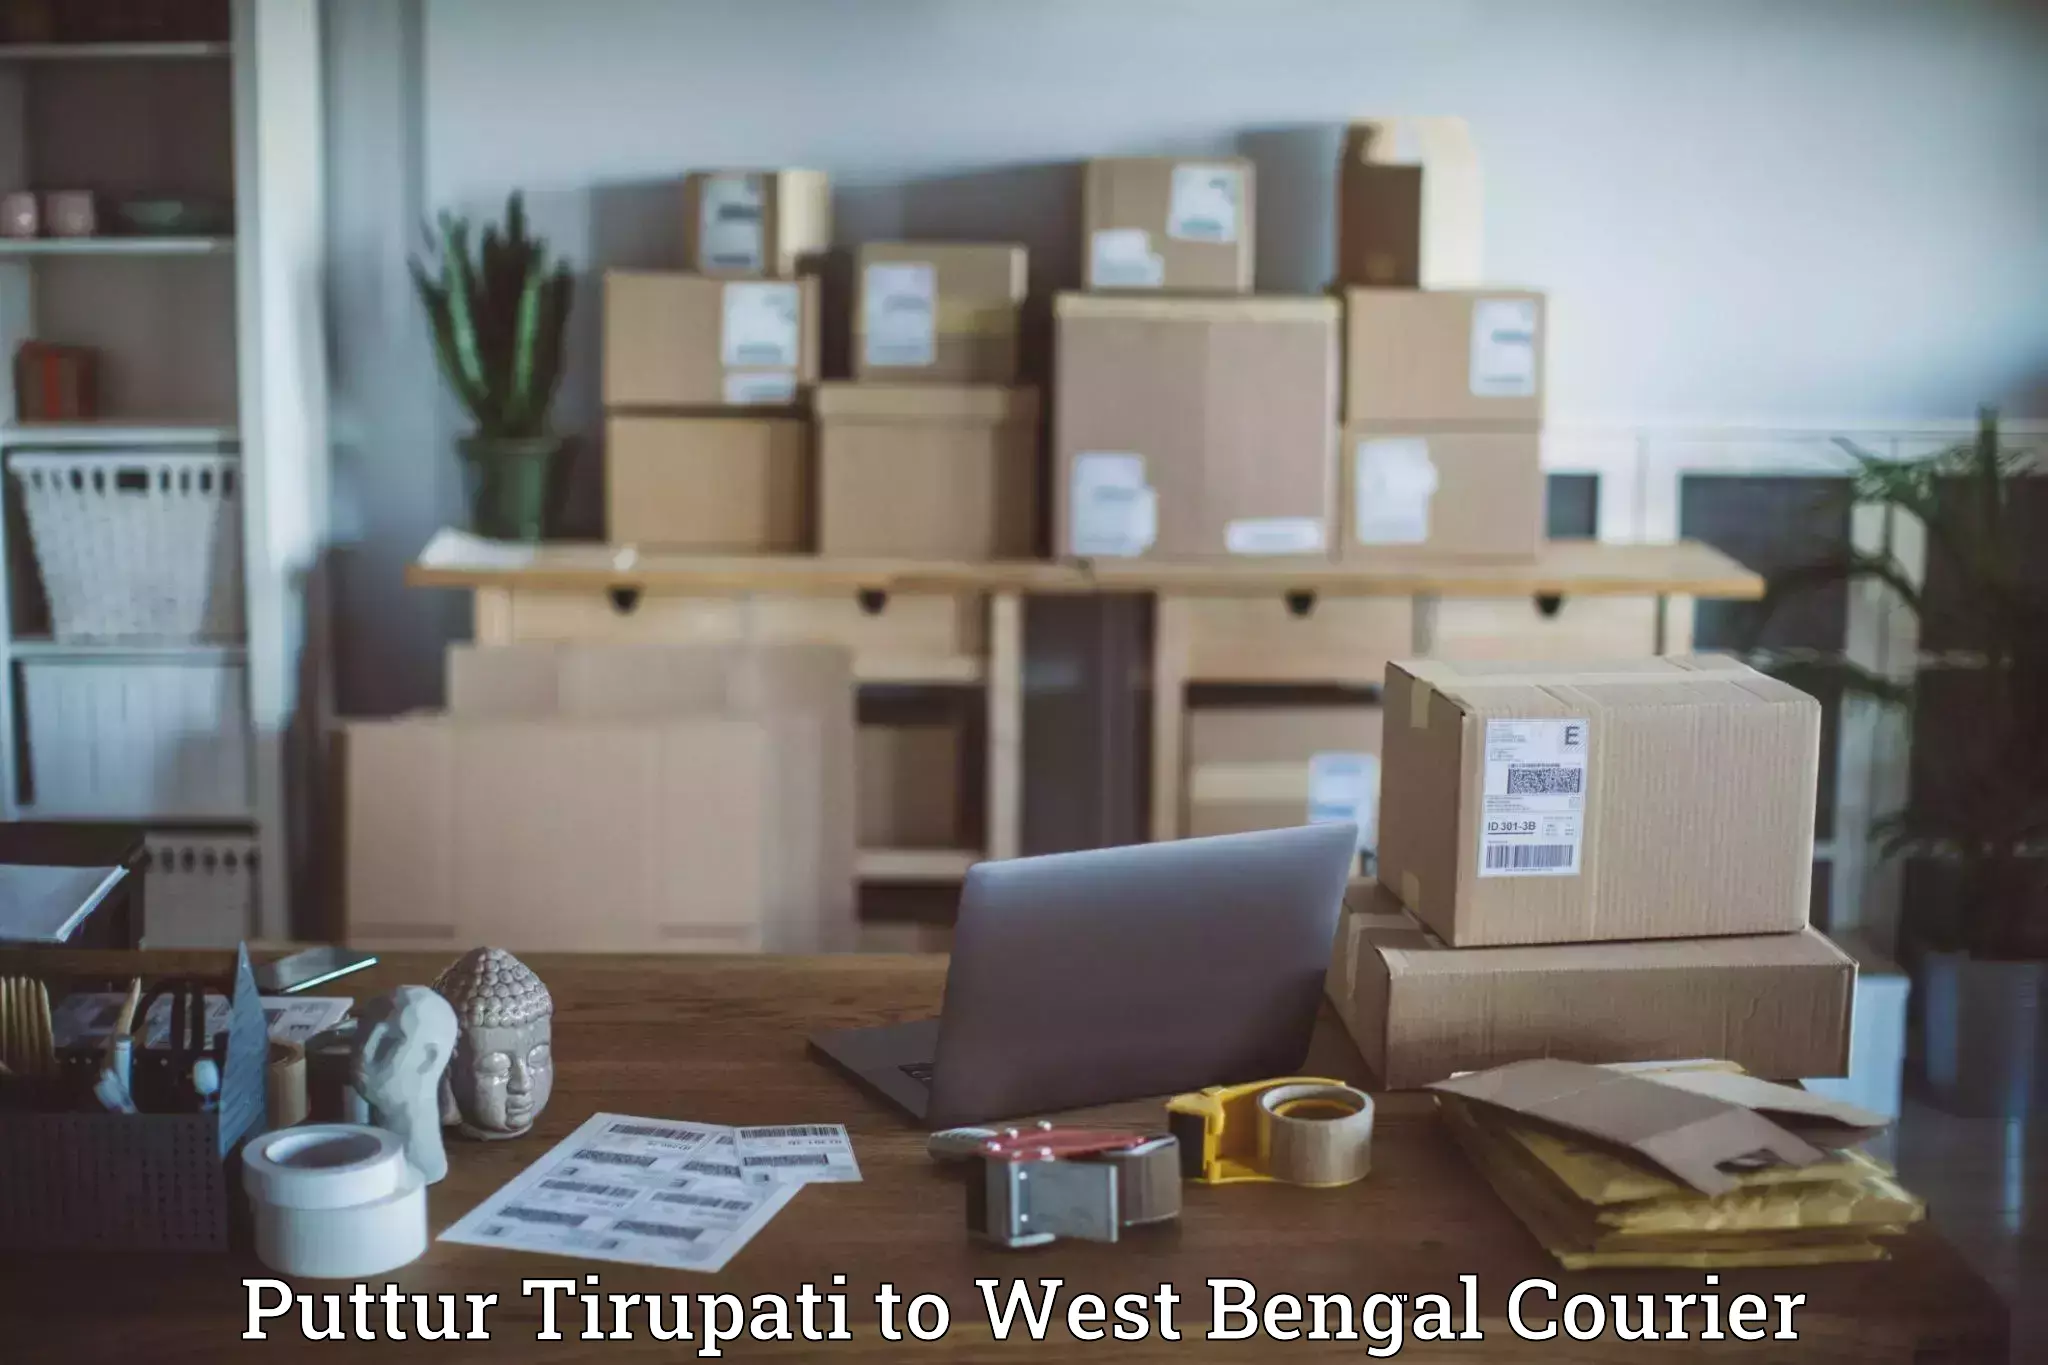 Large-scale shipping solutions Puttur Tirupati to West Bengal